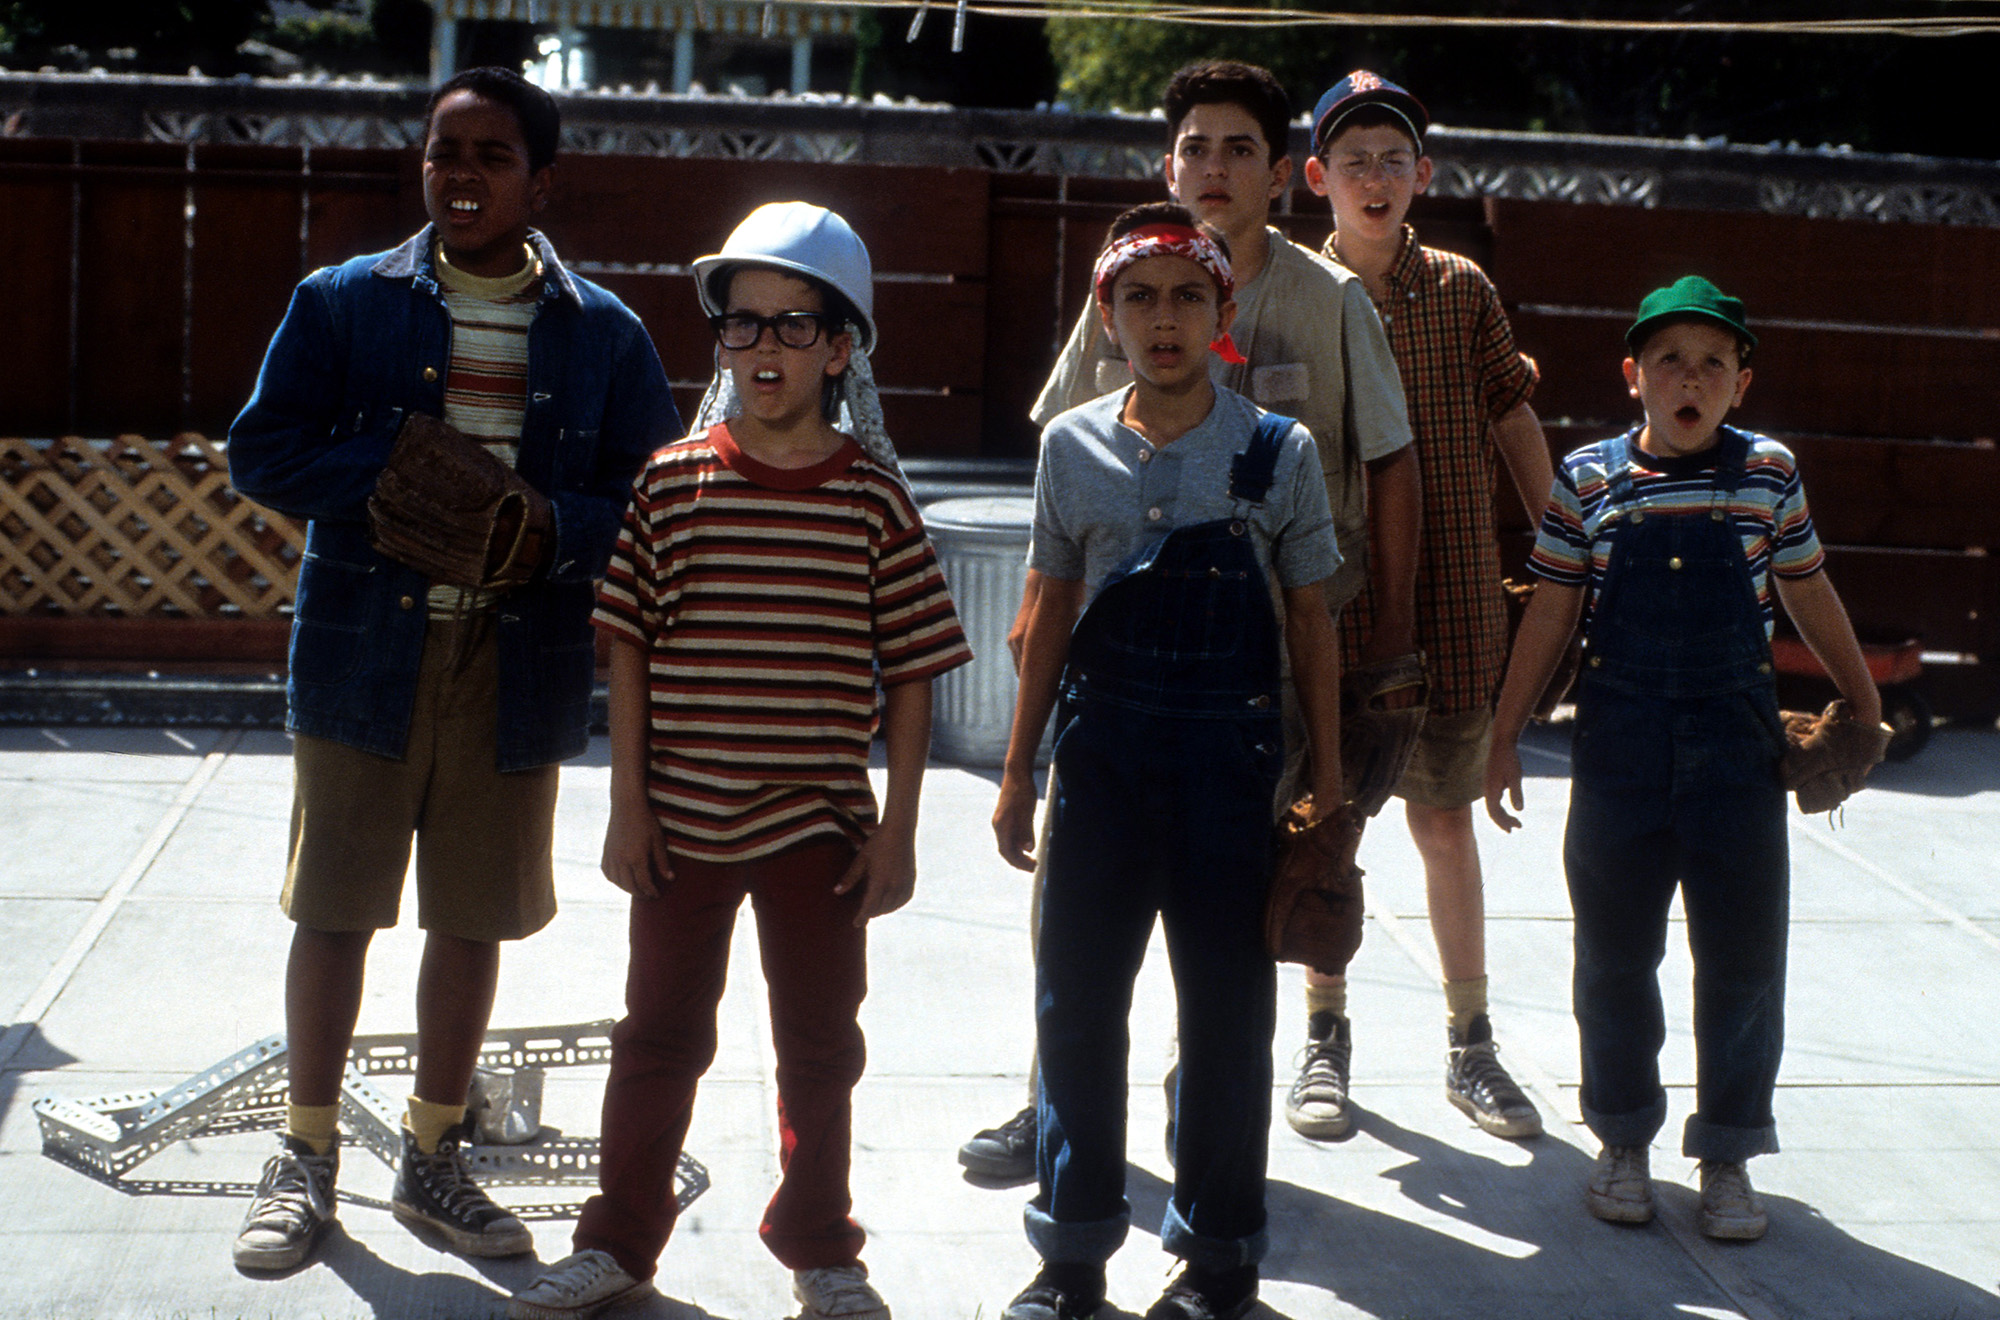 The Sandlot Cast Reunited for the Movie's 25th Anniversary